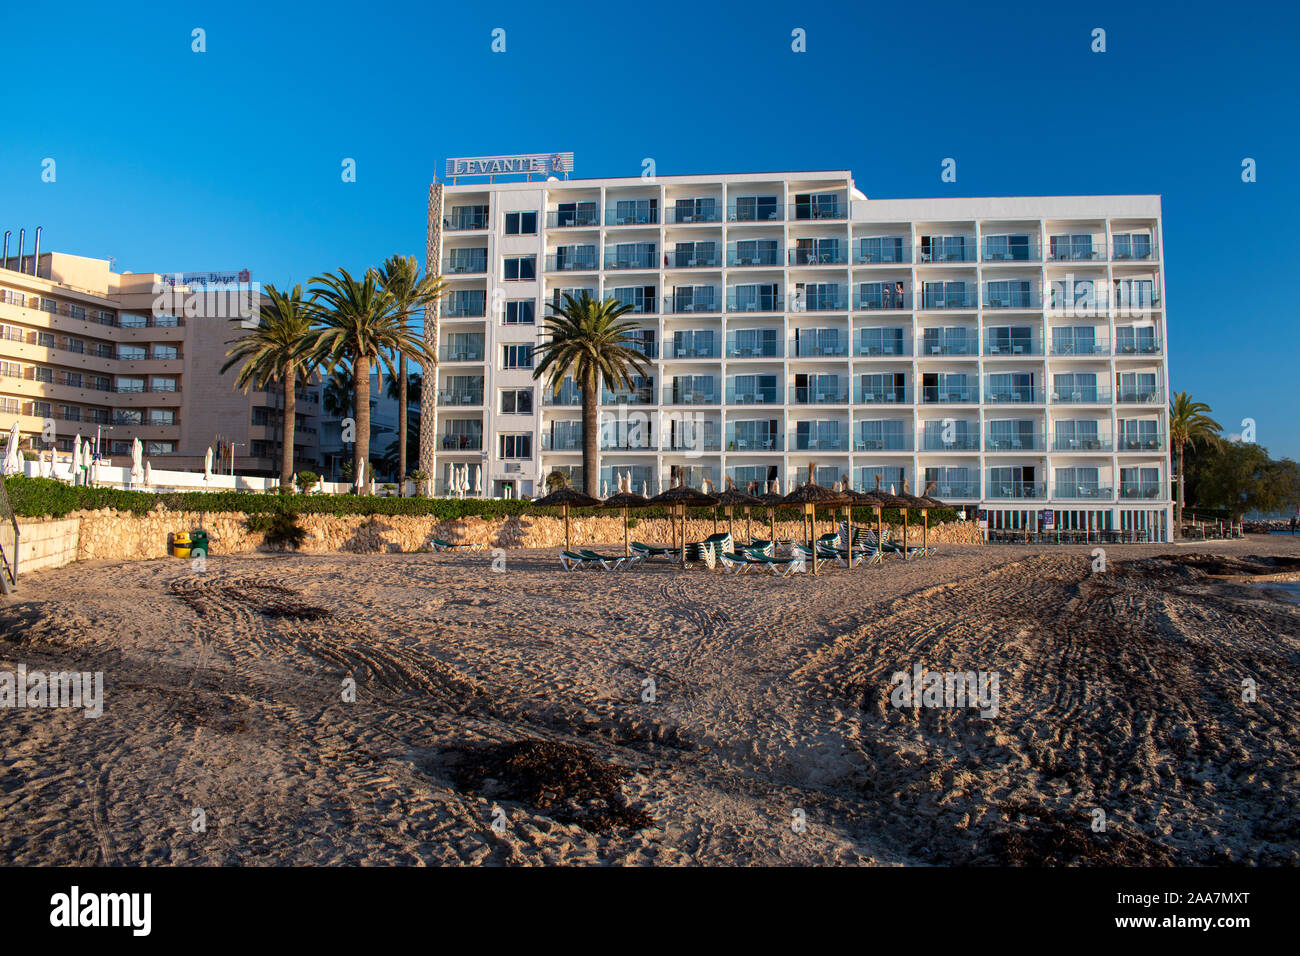 Cala Bona, Mallorca, Spain, October 19, 2019, Levante Hotel view of this popular 4 star hotel in a prime position on the beach. Stock Photo